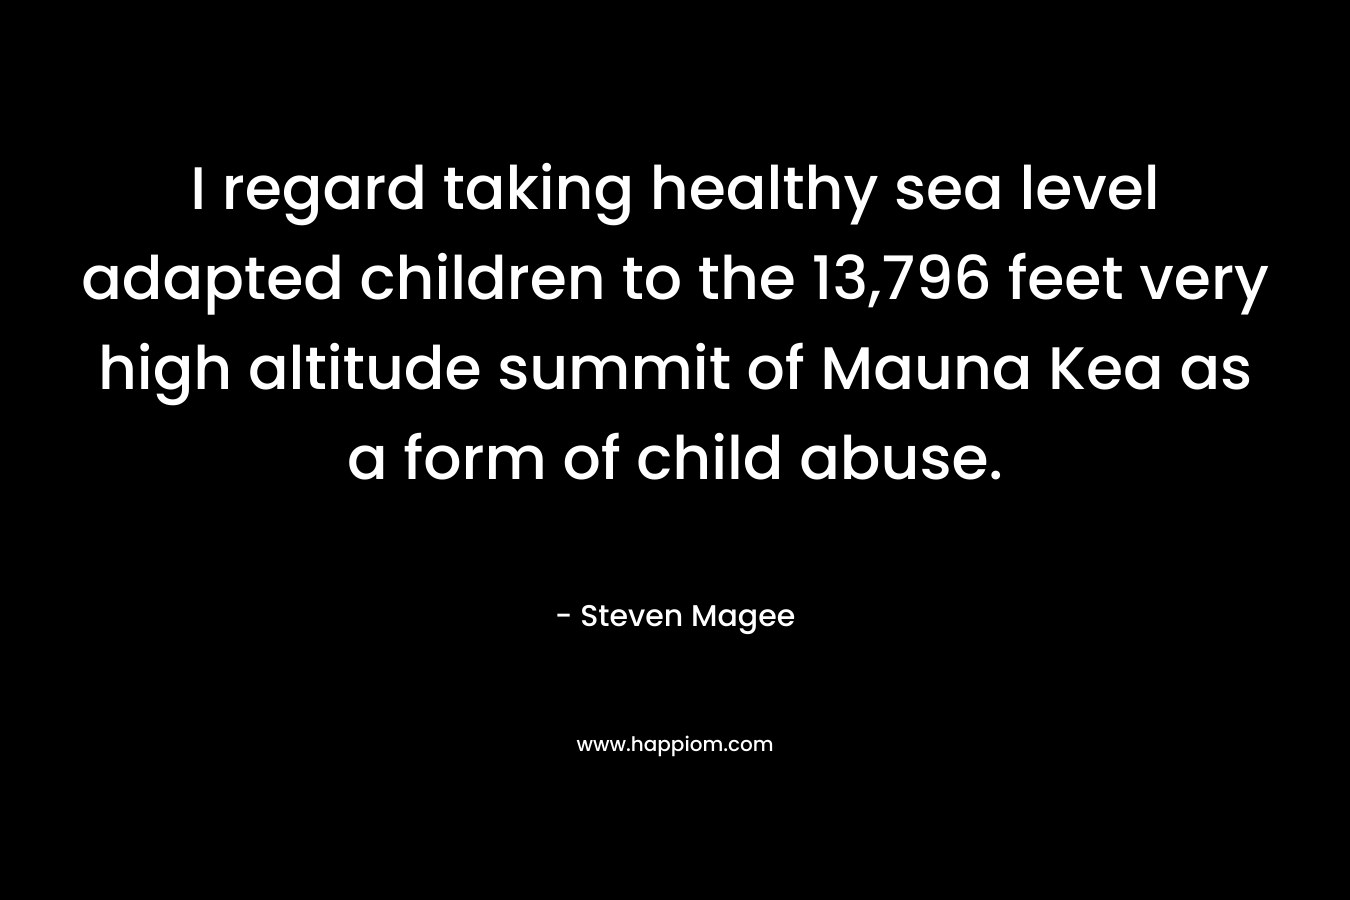 I regard taking healthy sea level adapted children to the 13,796 feet very high altitude summit of Mauna Kea as a form of child abuse.